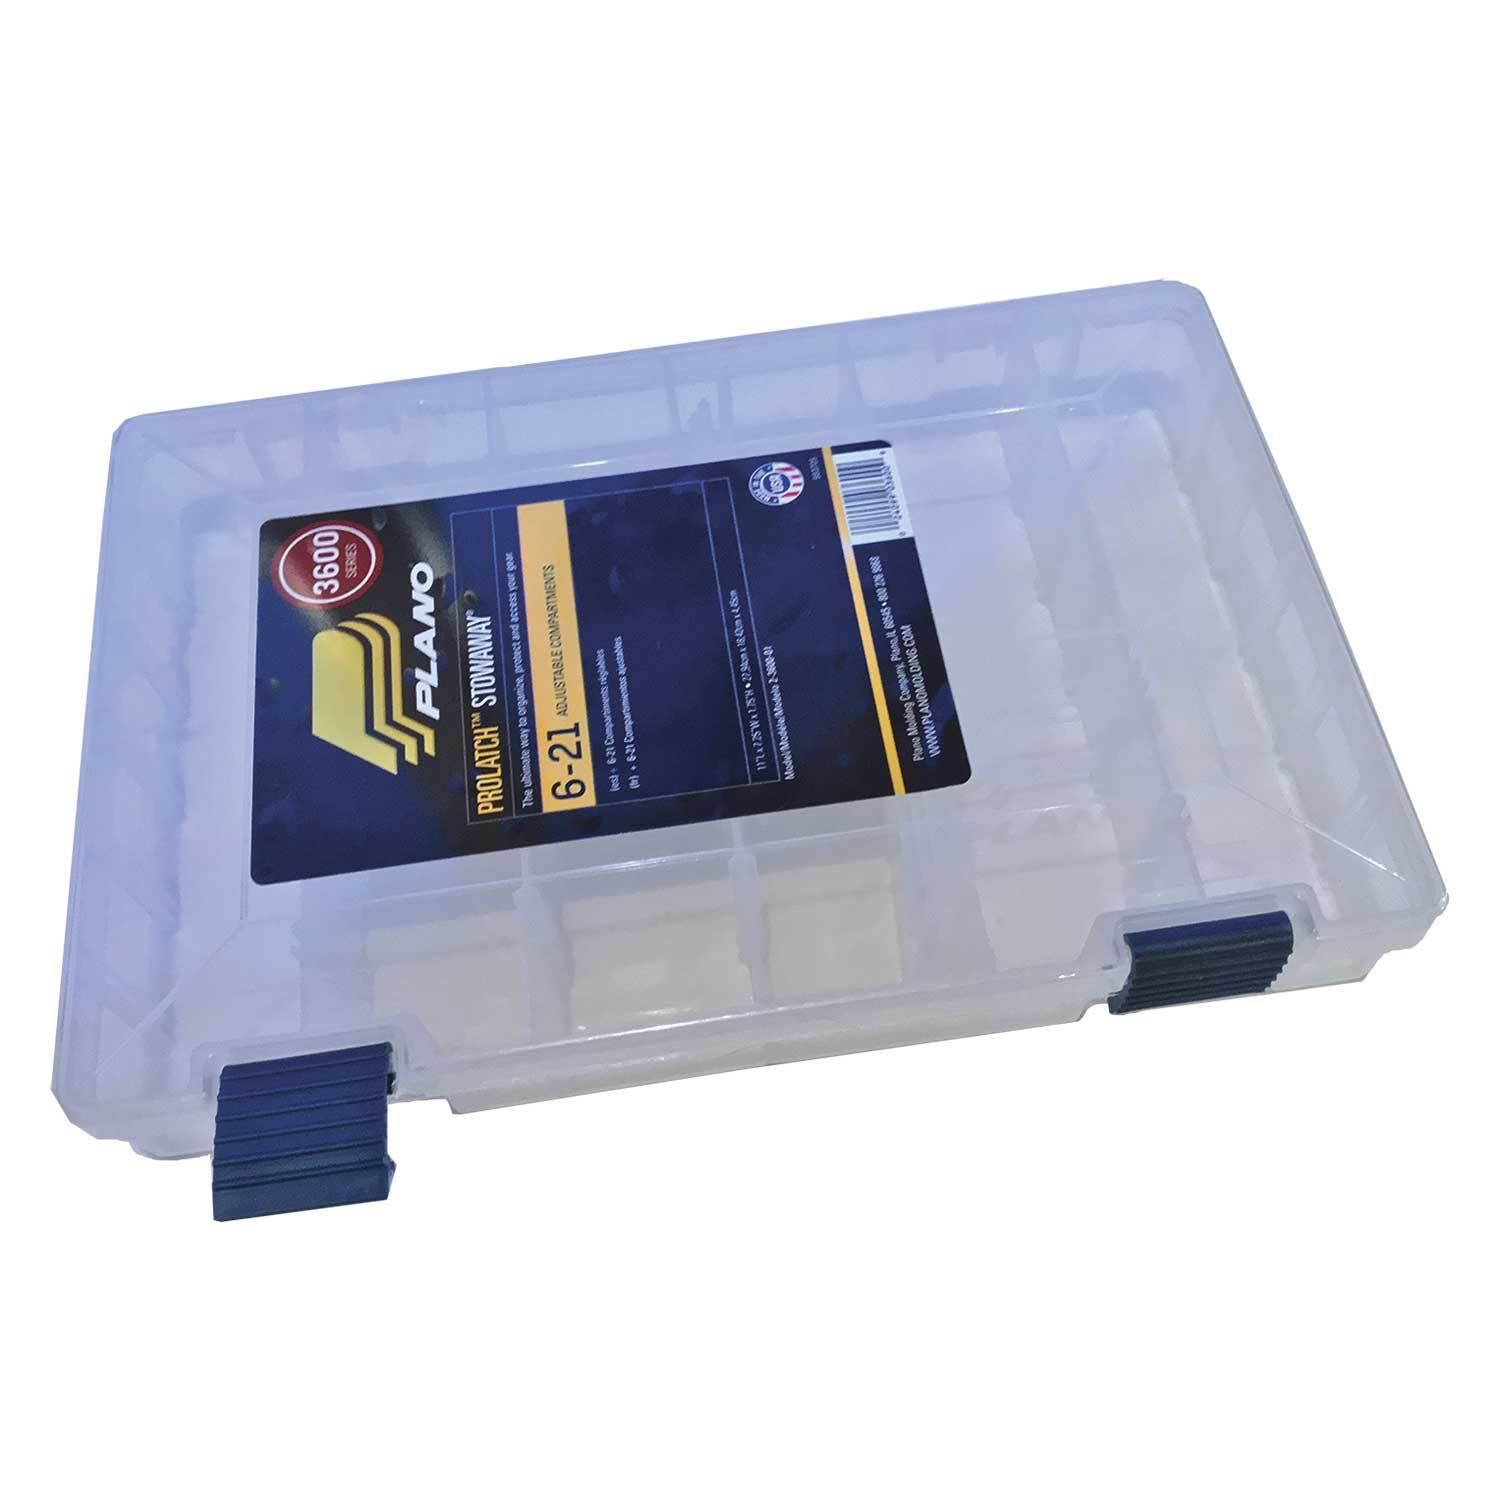 Plano Adjustable Compartment Stowaway Tackle Box 